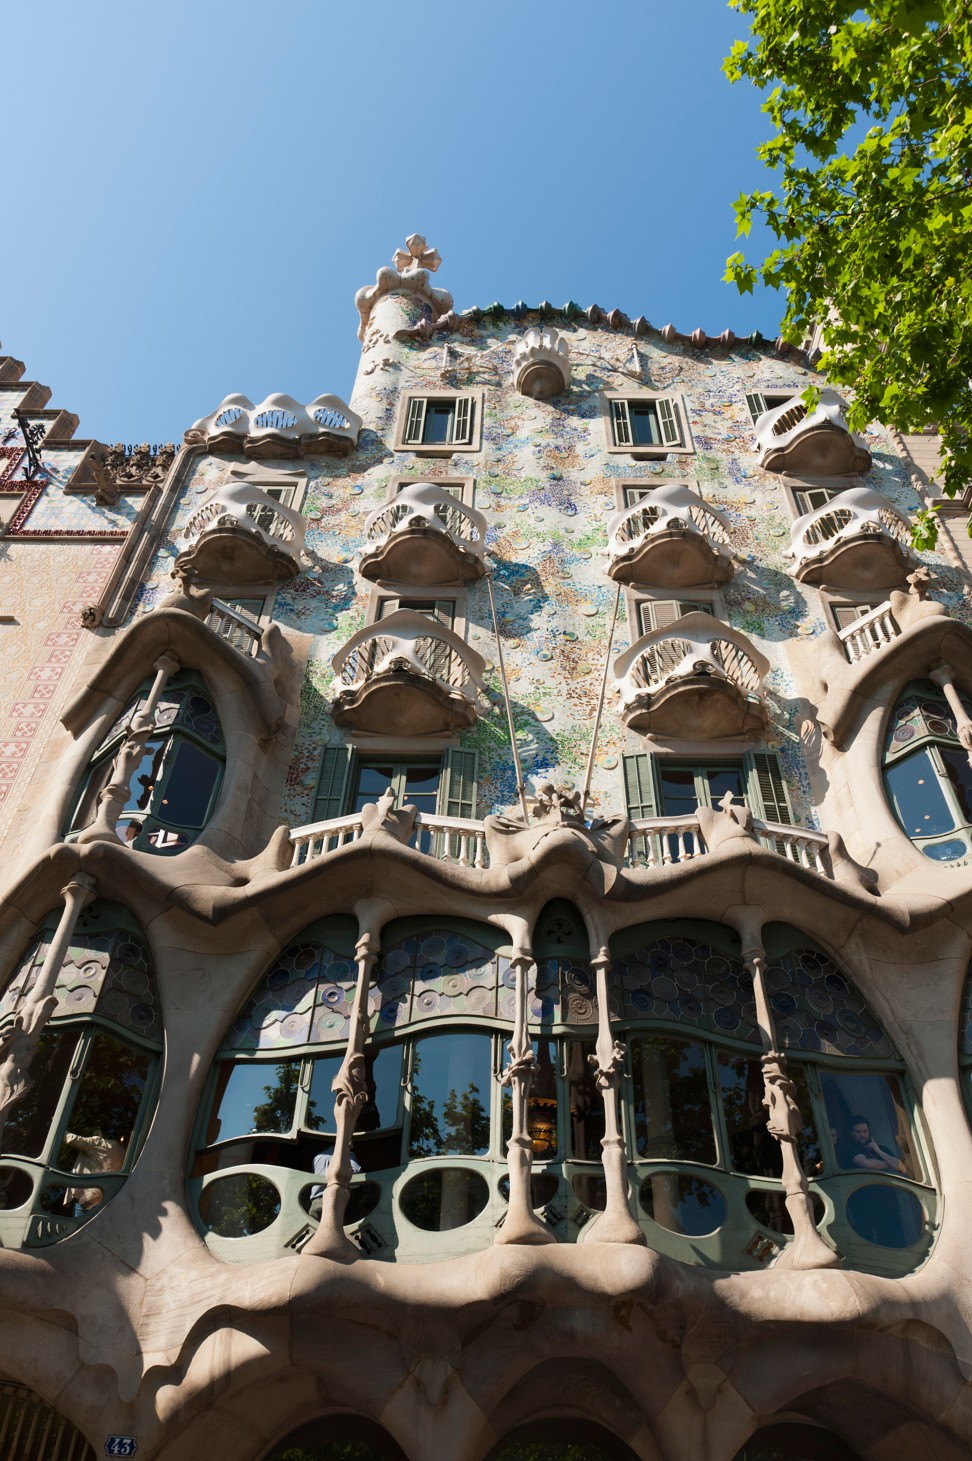 Casa Batlló by Antoni Gaudí, one of the sights to fit in between meals. Photo: Alamy